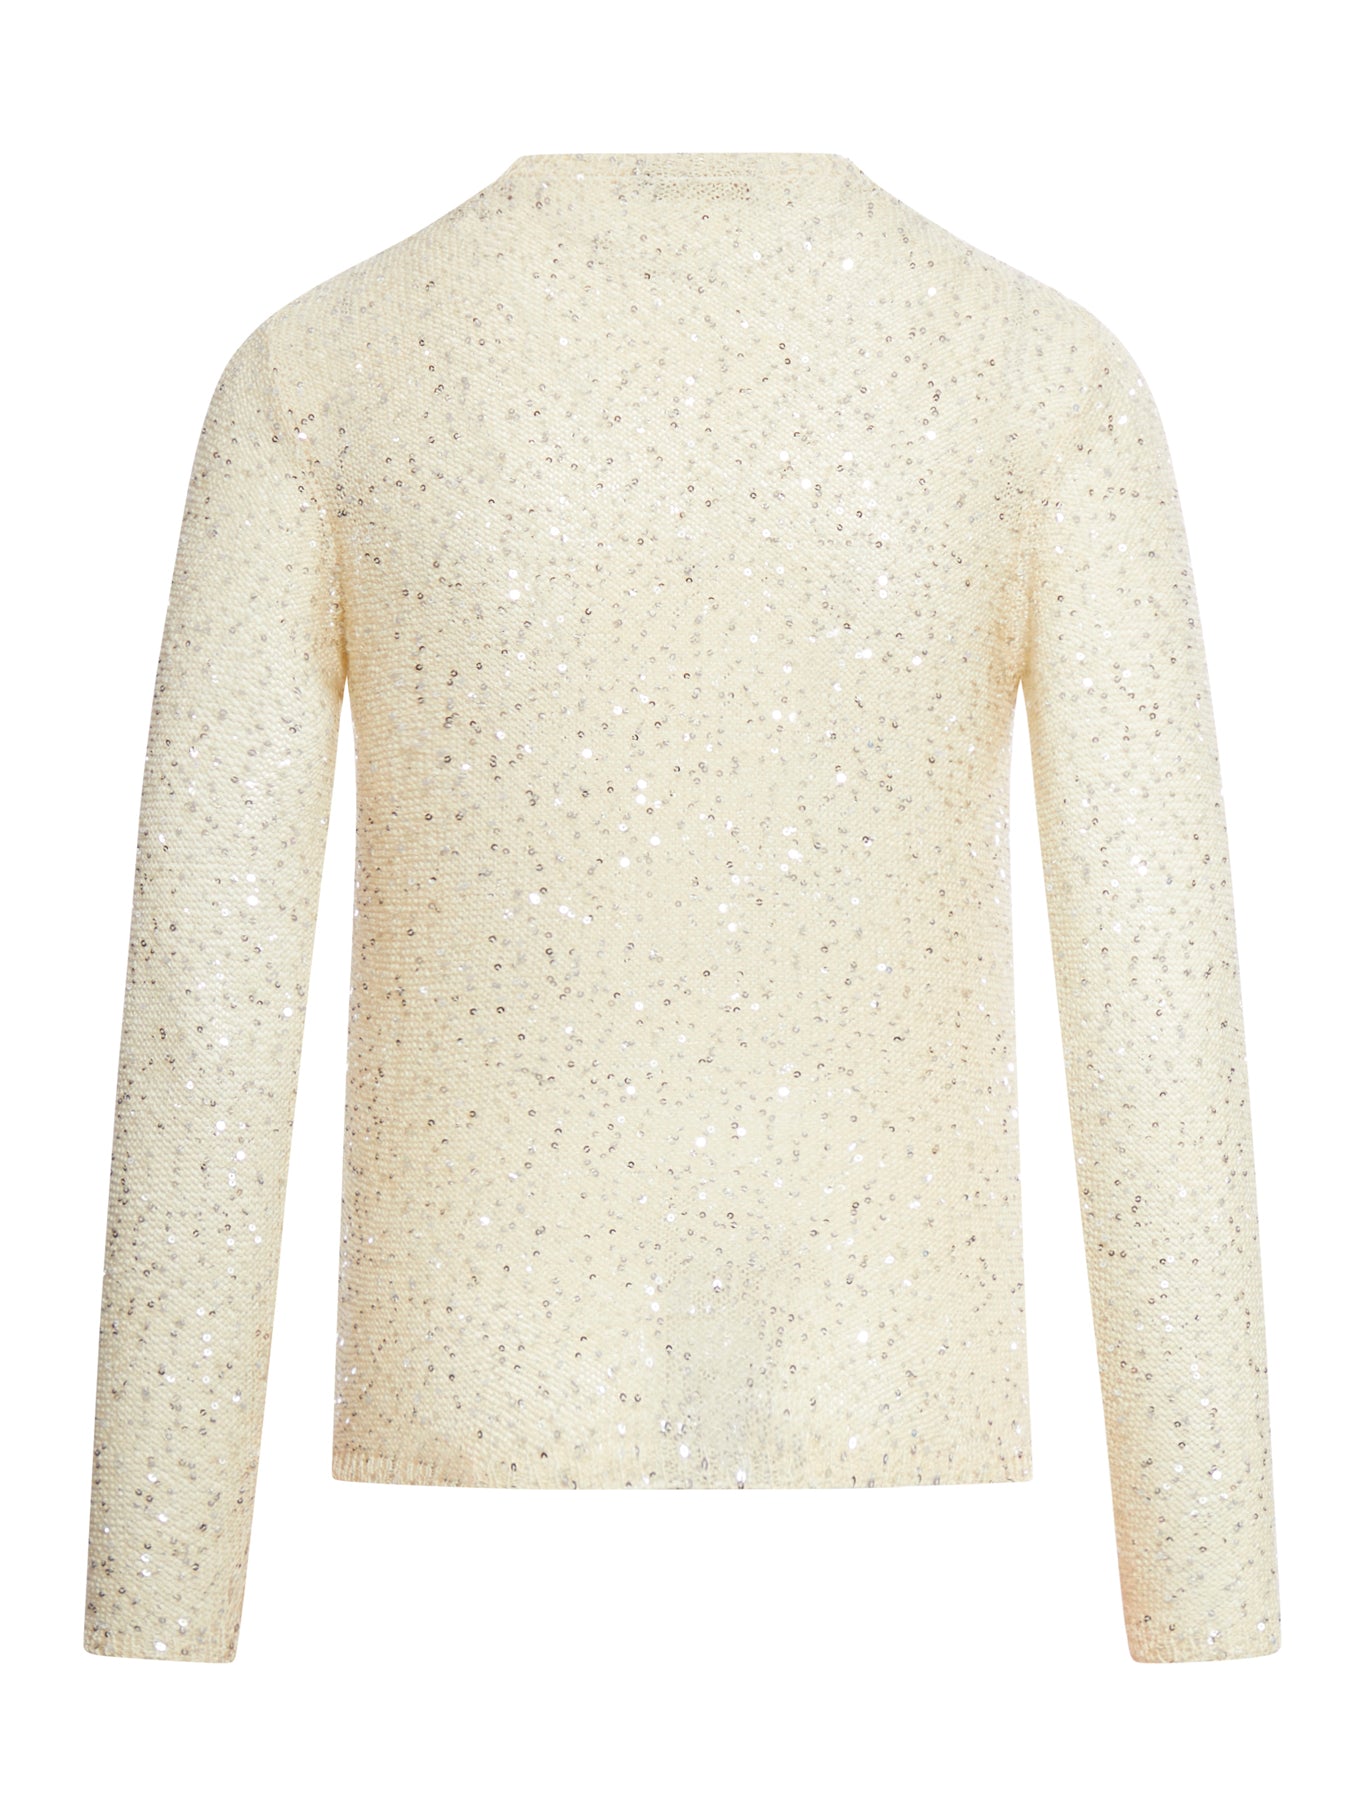 sweater with sequins